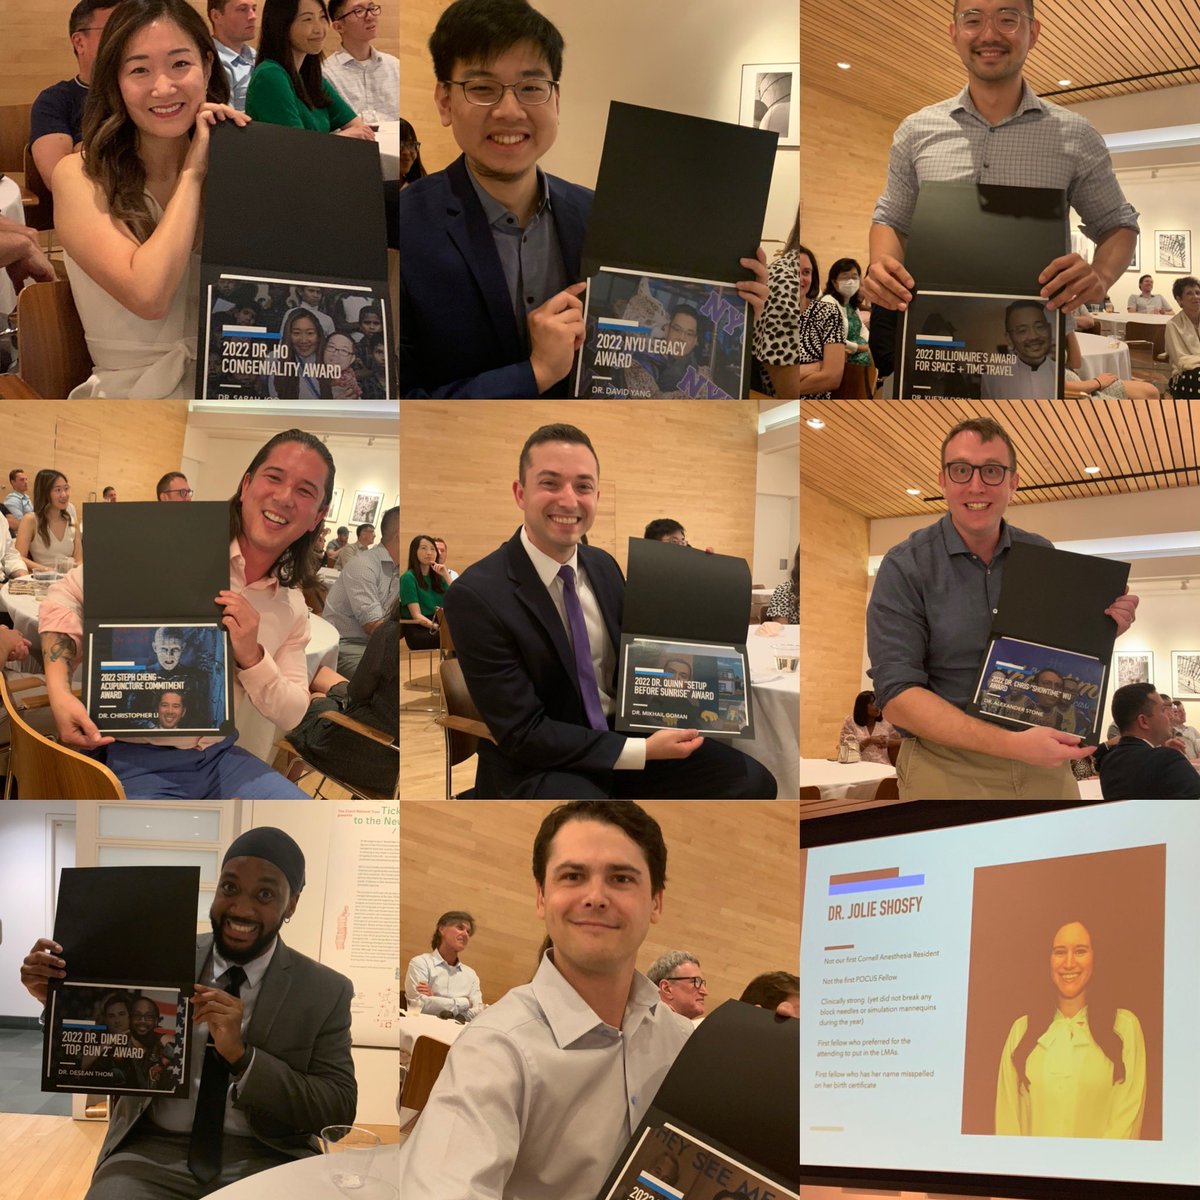 Congratulations to all the graduating HSS Regional Anesthesia and Pain Management Fellows!! You guys have been great and best wishes for the future! Please all keep in touch! @RamenShamanMD @alexbstone @SarahJooMD @HSSAnesthesia @HSpecialSurgery